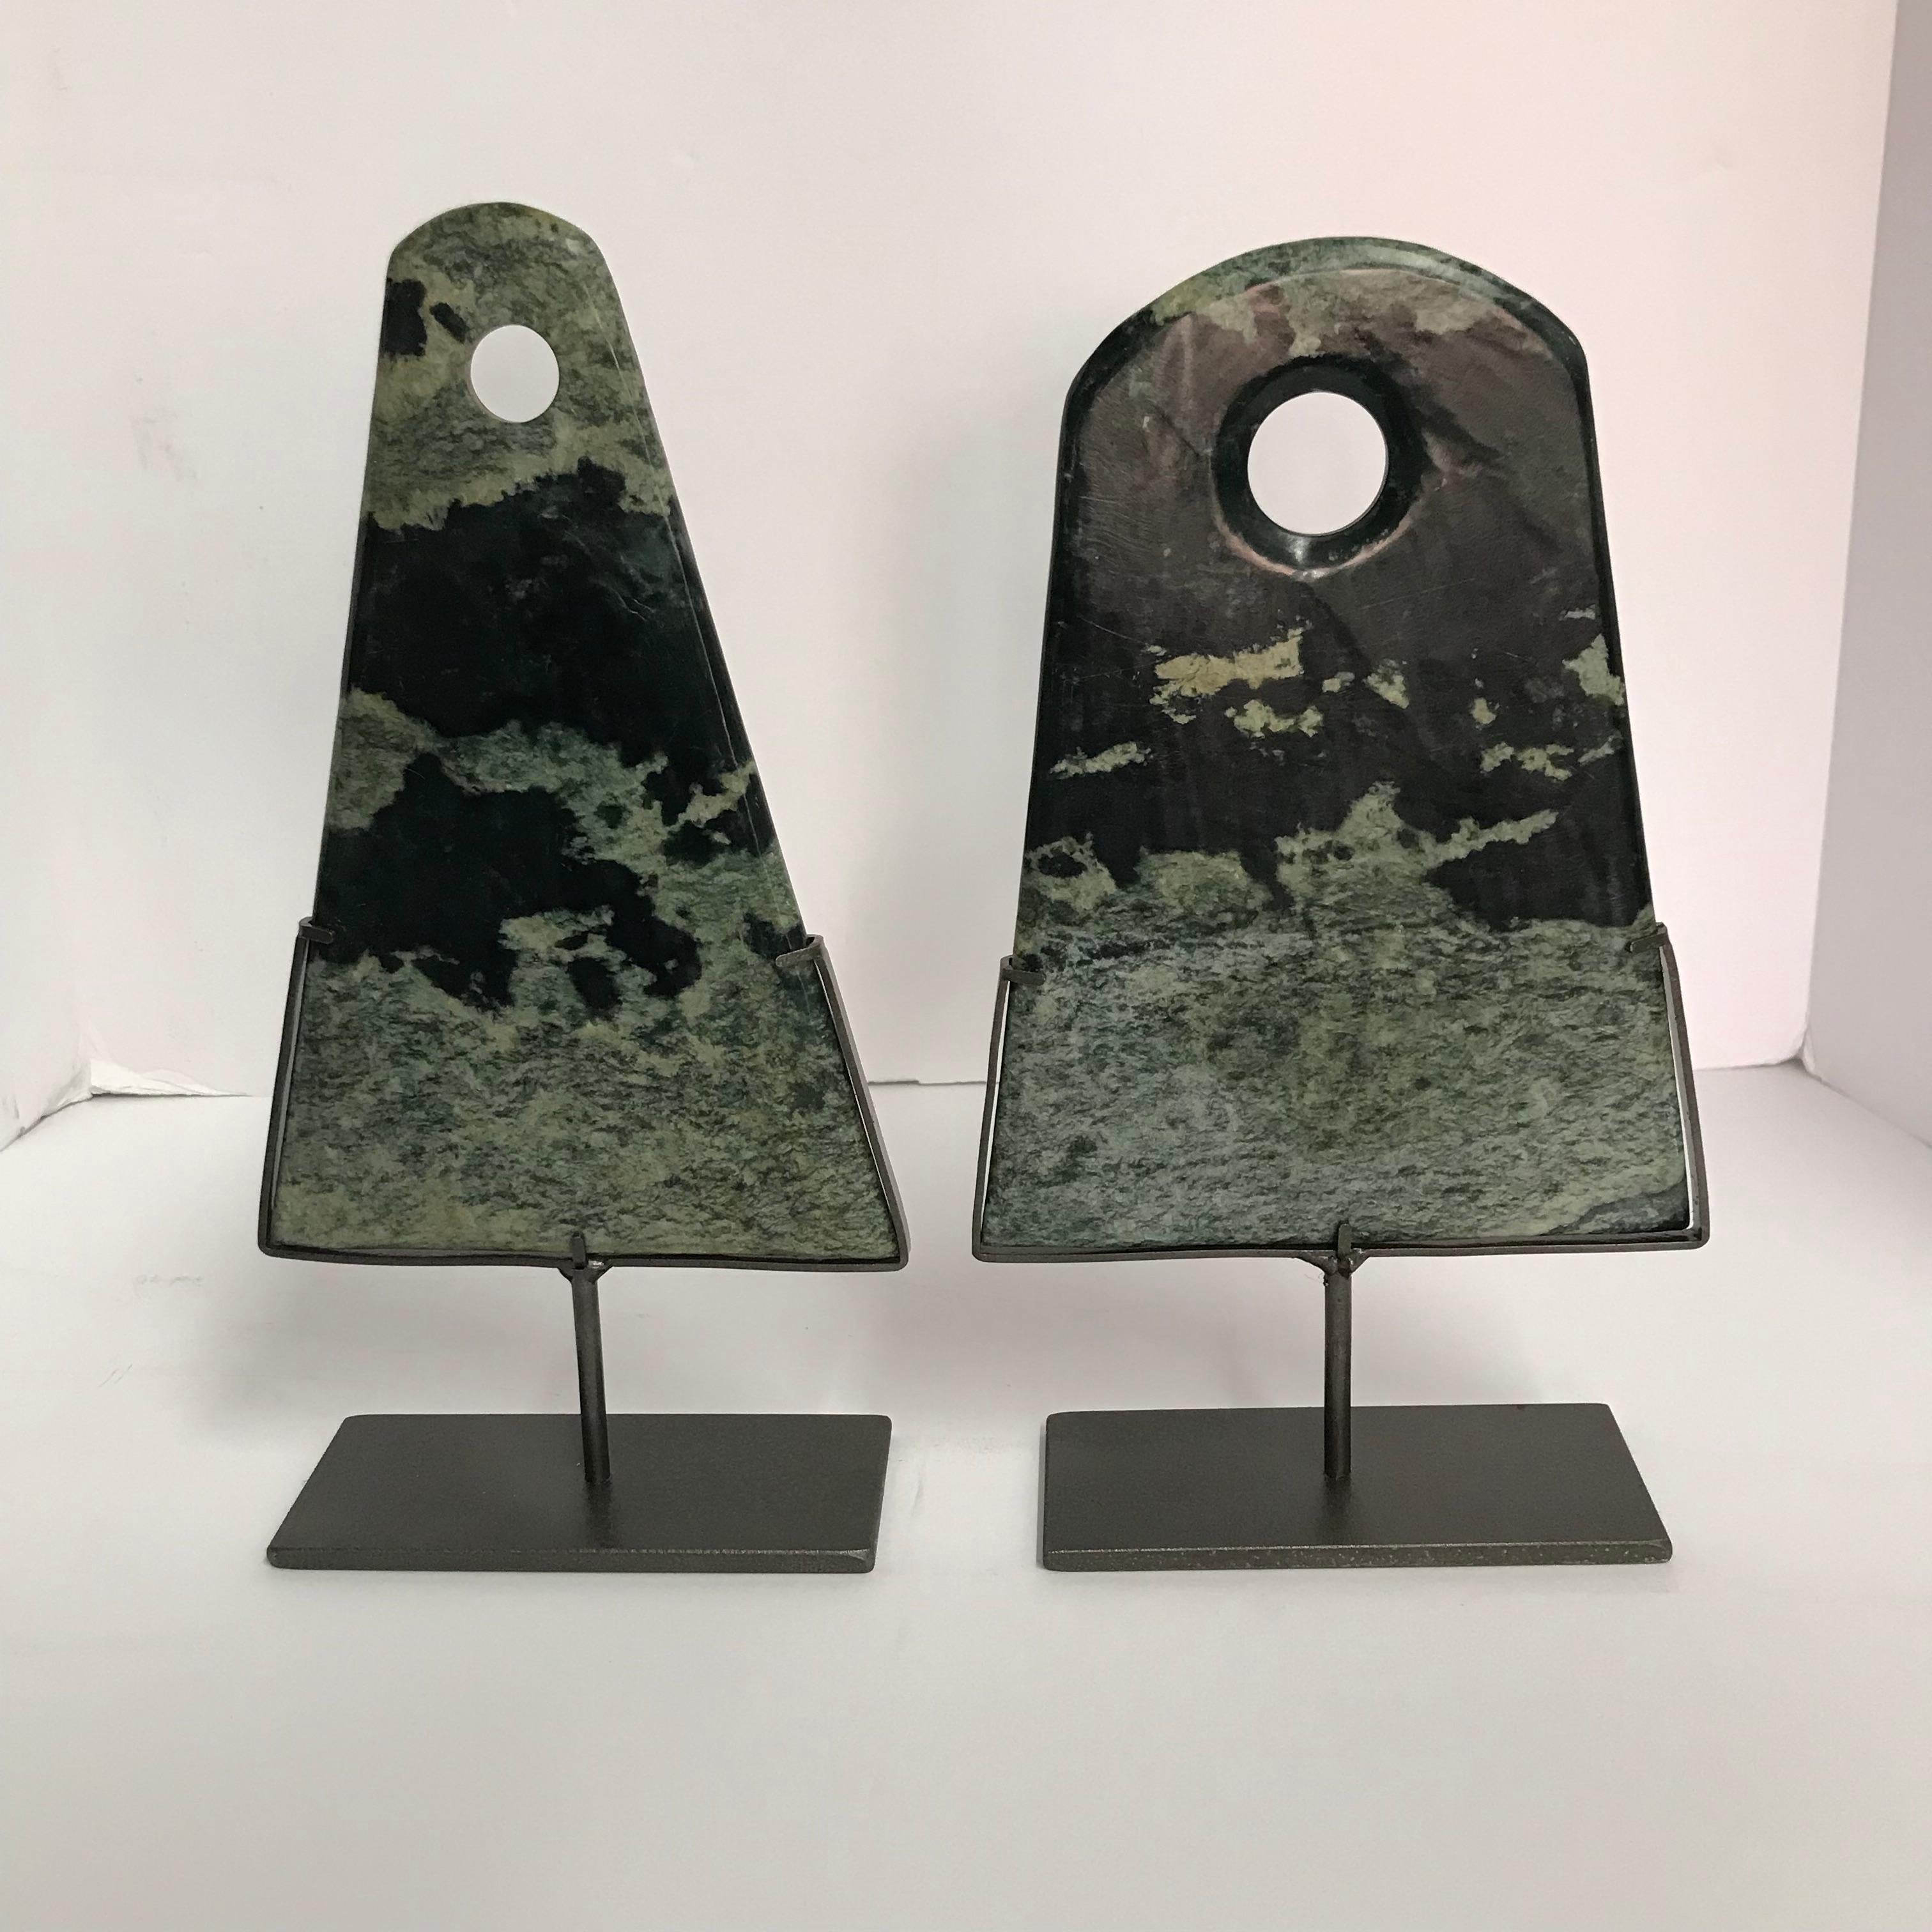 Contemporary Chinese set of two triangle shaped stone discs on metal stands
Dark and light green in coloration.
One disc measures 6.5